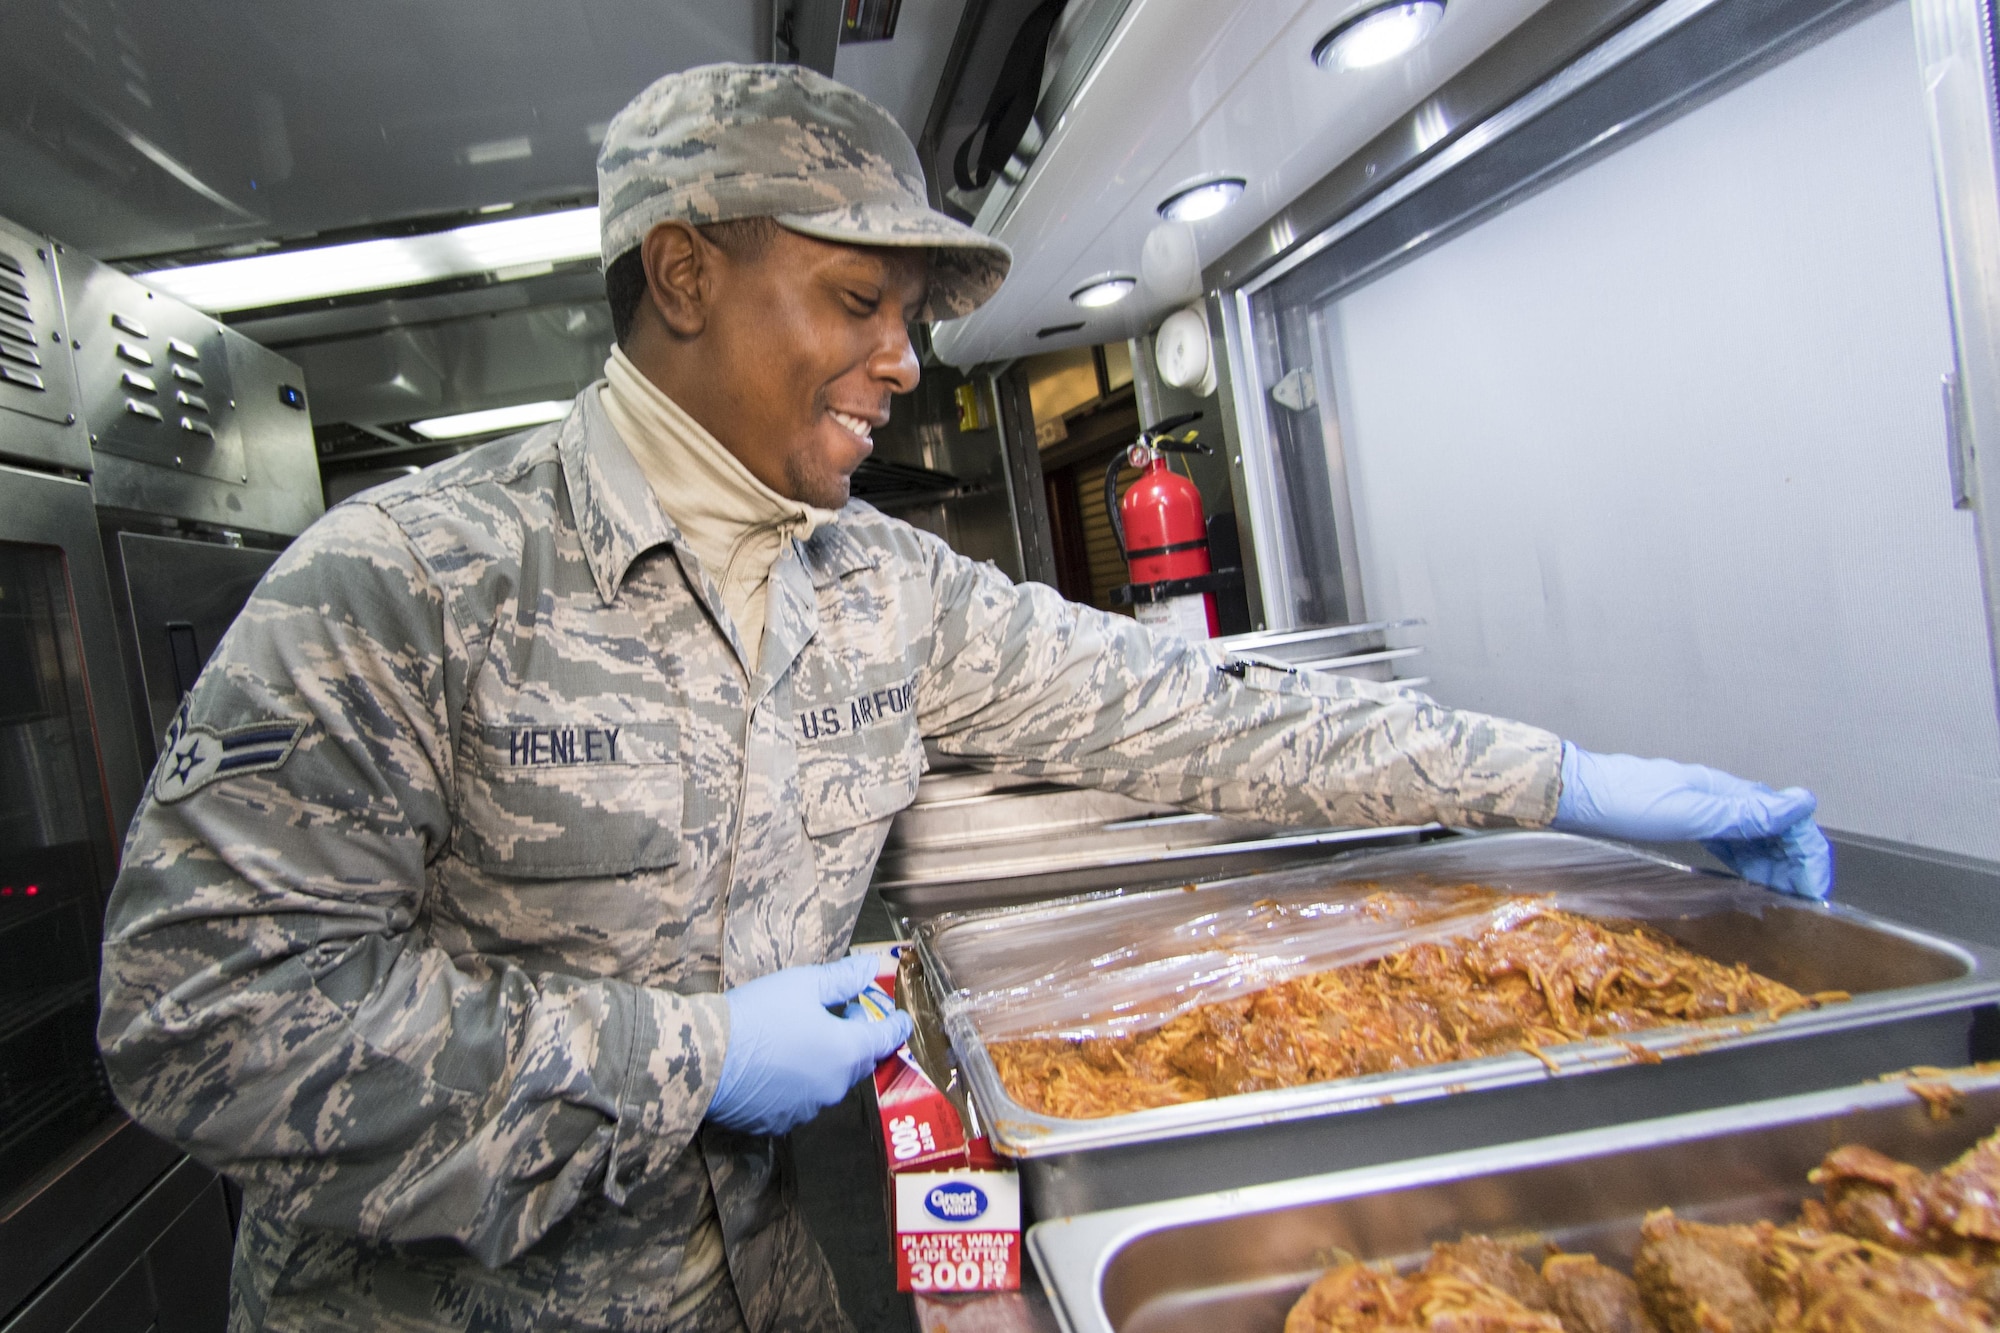 U.S. Air Force Airman 1st Class Dasmon Henley from the 116th Air Control Wing (ACW) Services Flight, Georgia Air National Guard (ANG), prepares a tray of spaghetti during dinner preparation for joint-forces personnel supporting the 58th Presidential Inauguration, Washington, D.C., January 18, 2017. A team of 10 Airmen from the 116th ACW deployed with their Disaster Relief Mobile Kitchen Trailer (DRMKT).  Working from FedEx Field, home to the Washington Redskins, the team worked along side services teams from other ANG units across the nation preparing and serving meals to about 3,500 joint-force members per day deployed to the National Capital Region. In all, about 7,500 National Guard Soldiers and Airmen, from 44 states, three territories and the District of Columbia, served with the specially created Joint Task Force – District of Columbia. As a whole, National Guard Soldiers and Airmen augmented the U.S. Secret Service, U.S. Capitol Police and D.C. Metropolitan Police forces on a range of support including traffic control, crowd management, logistics and communication. (U.S. Air National Guard photo by Senior Master Sgt. Roger Parsons)